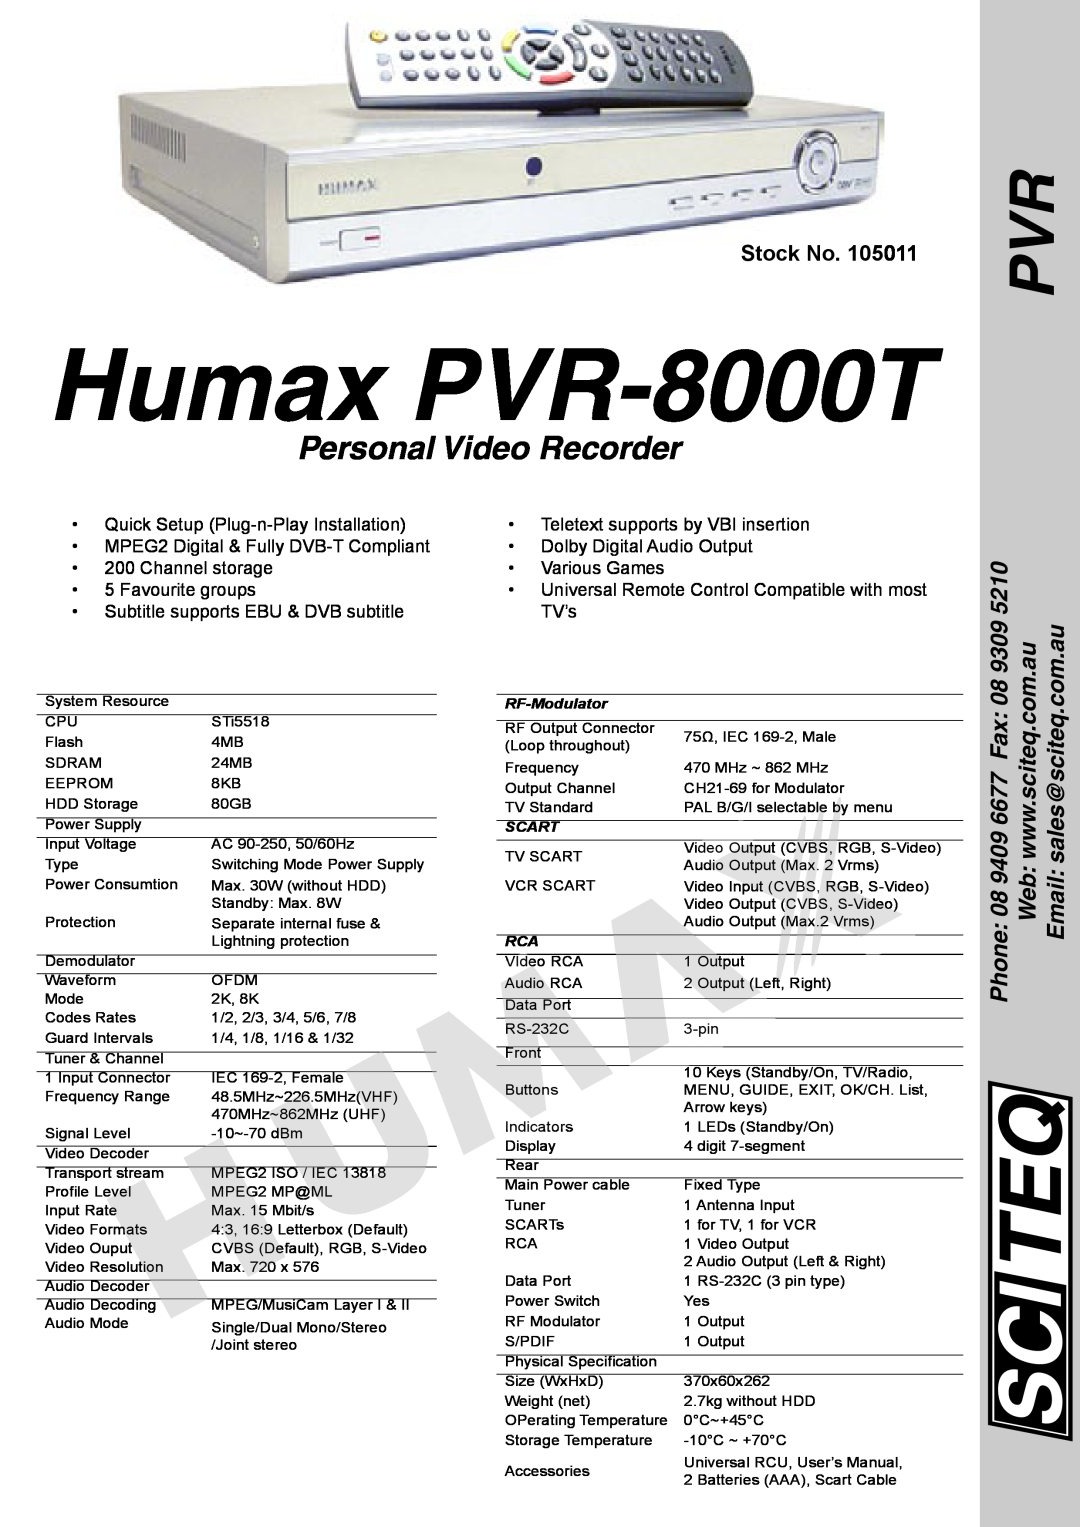 Humax specifications Humax PVR-8000T, Teqsci, Personal Video Recorder, Stock No, Quick Setup Plug-n-Play Installation 